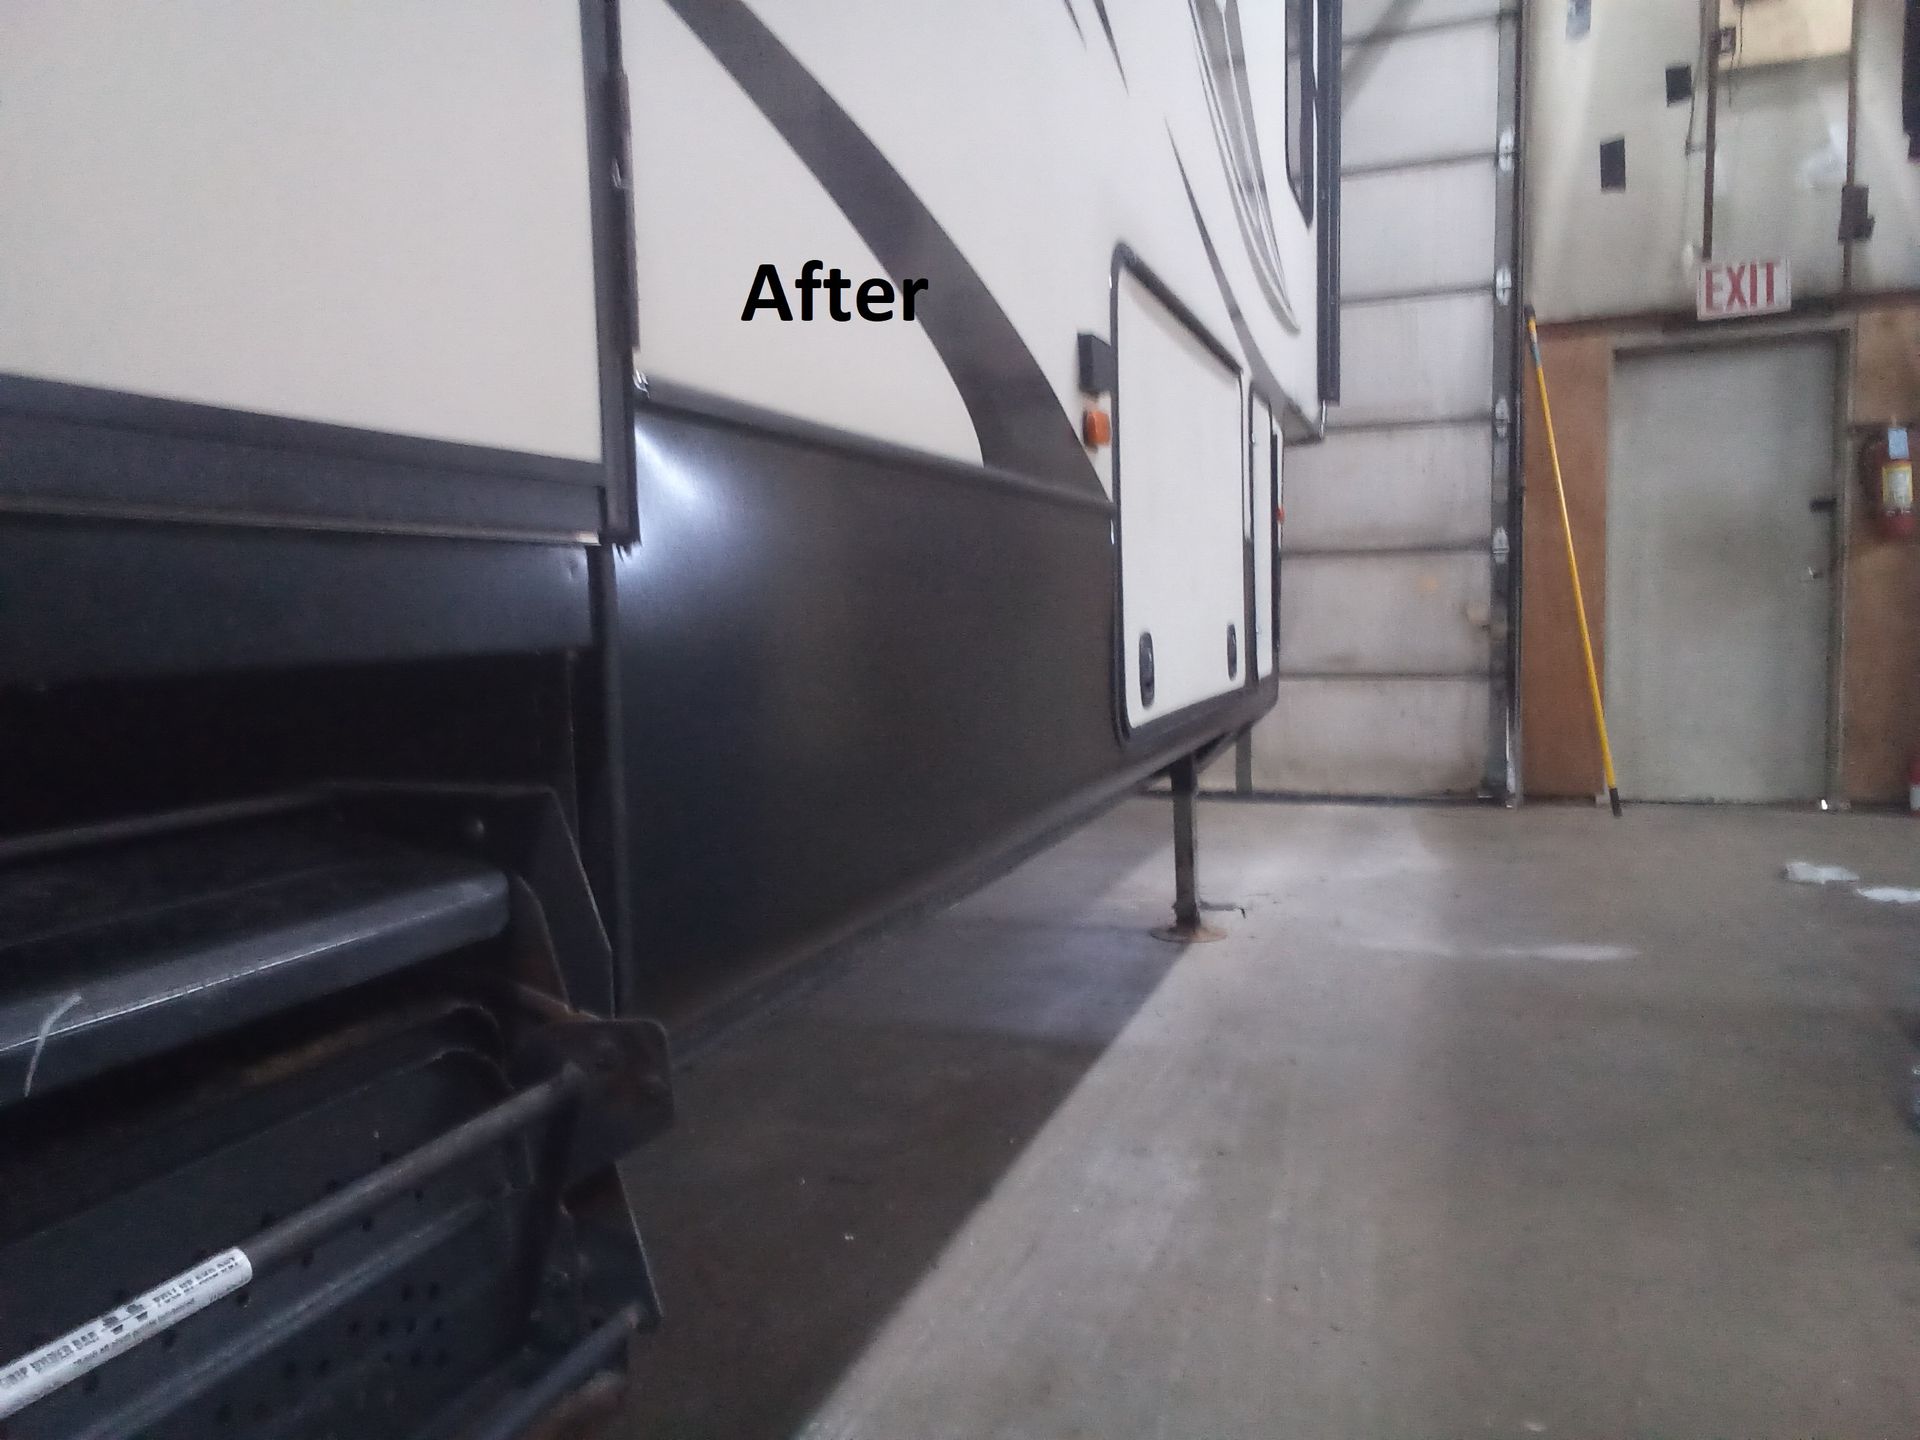 After Rebuilding the Side of RV Vehicle | Union, MO | 3R RV & Horse Trailer